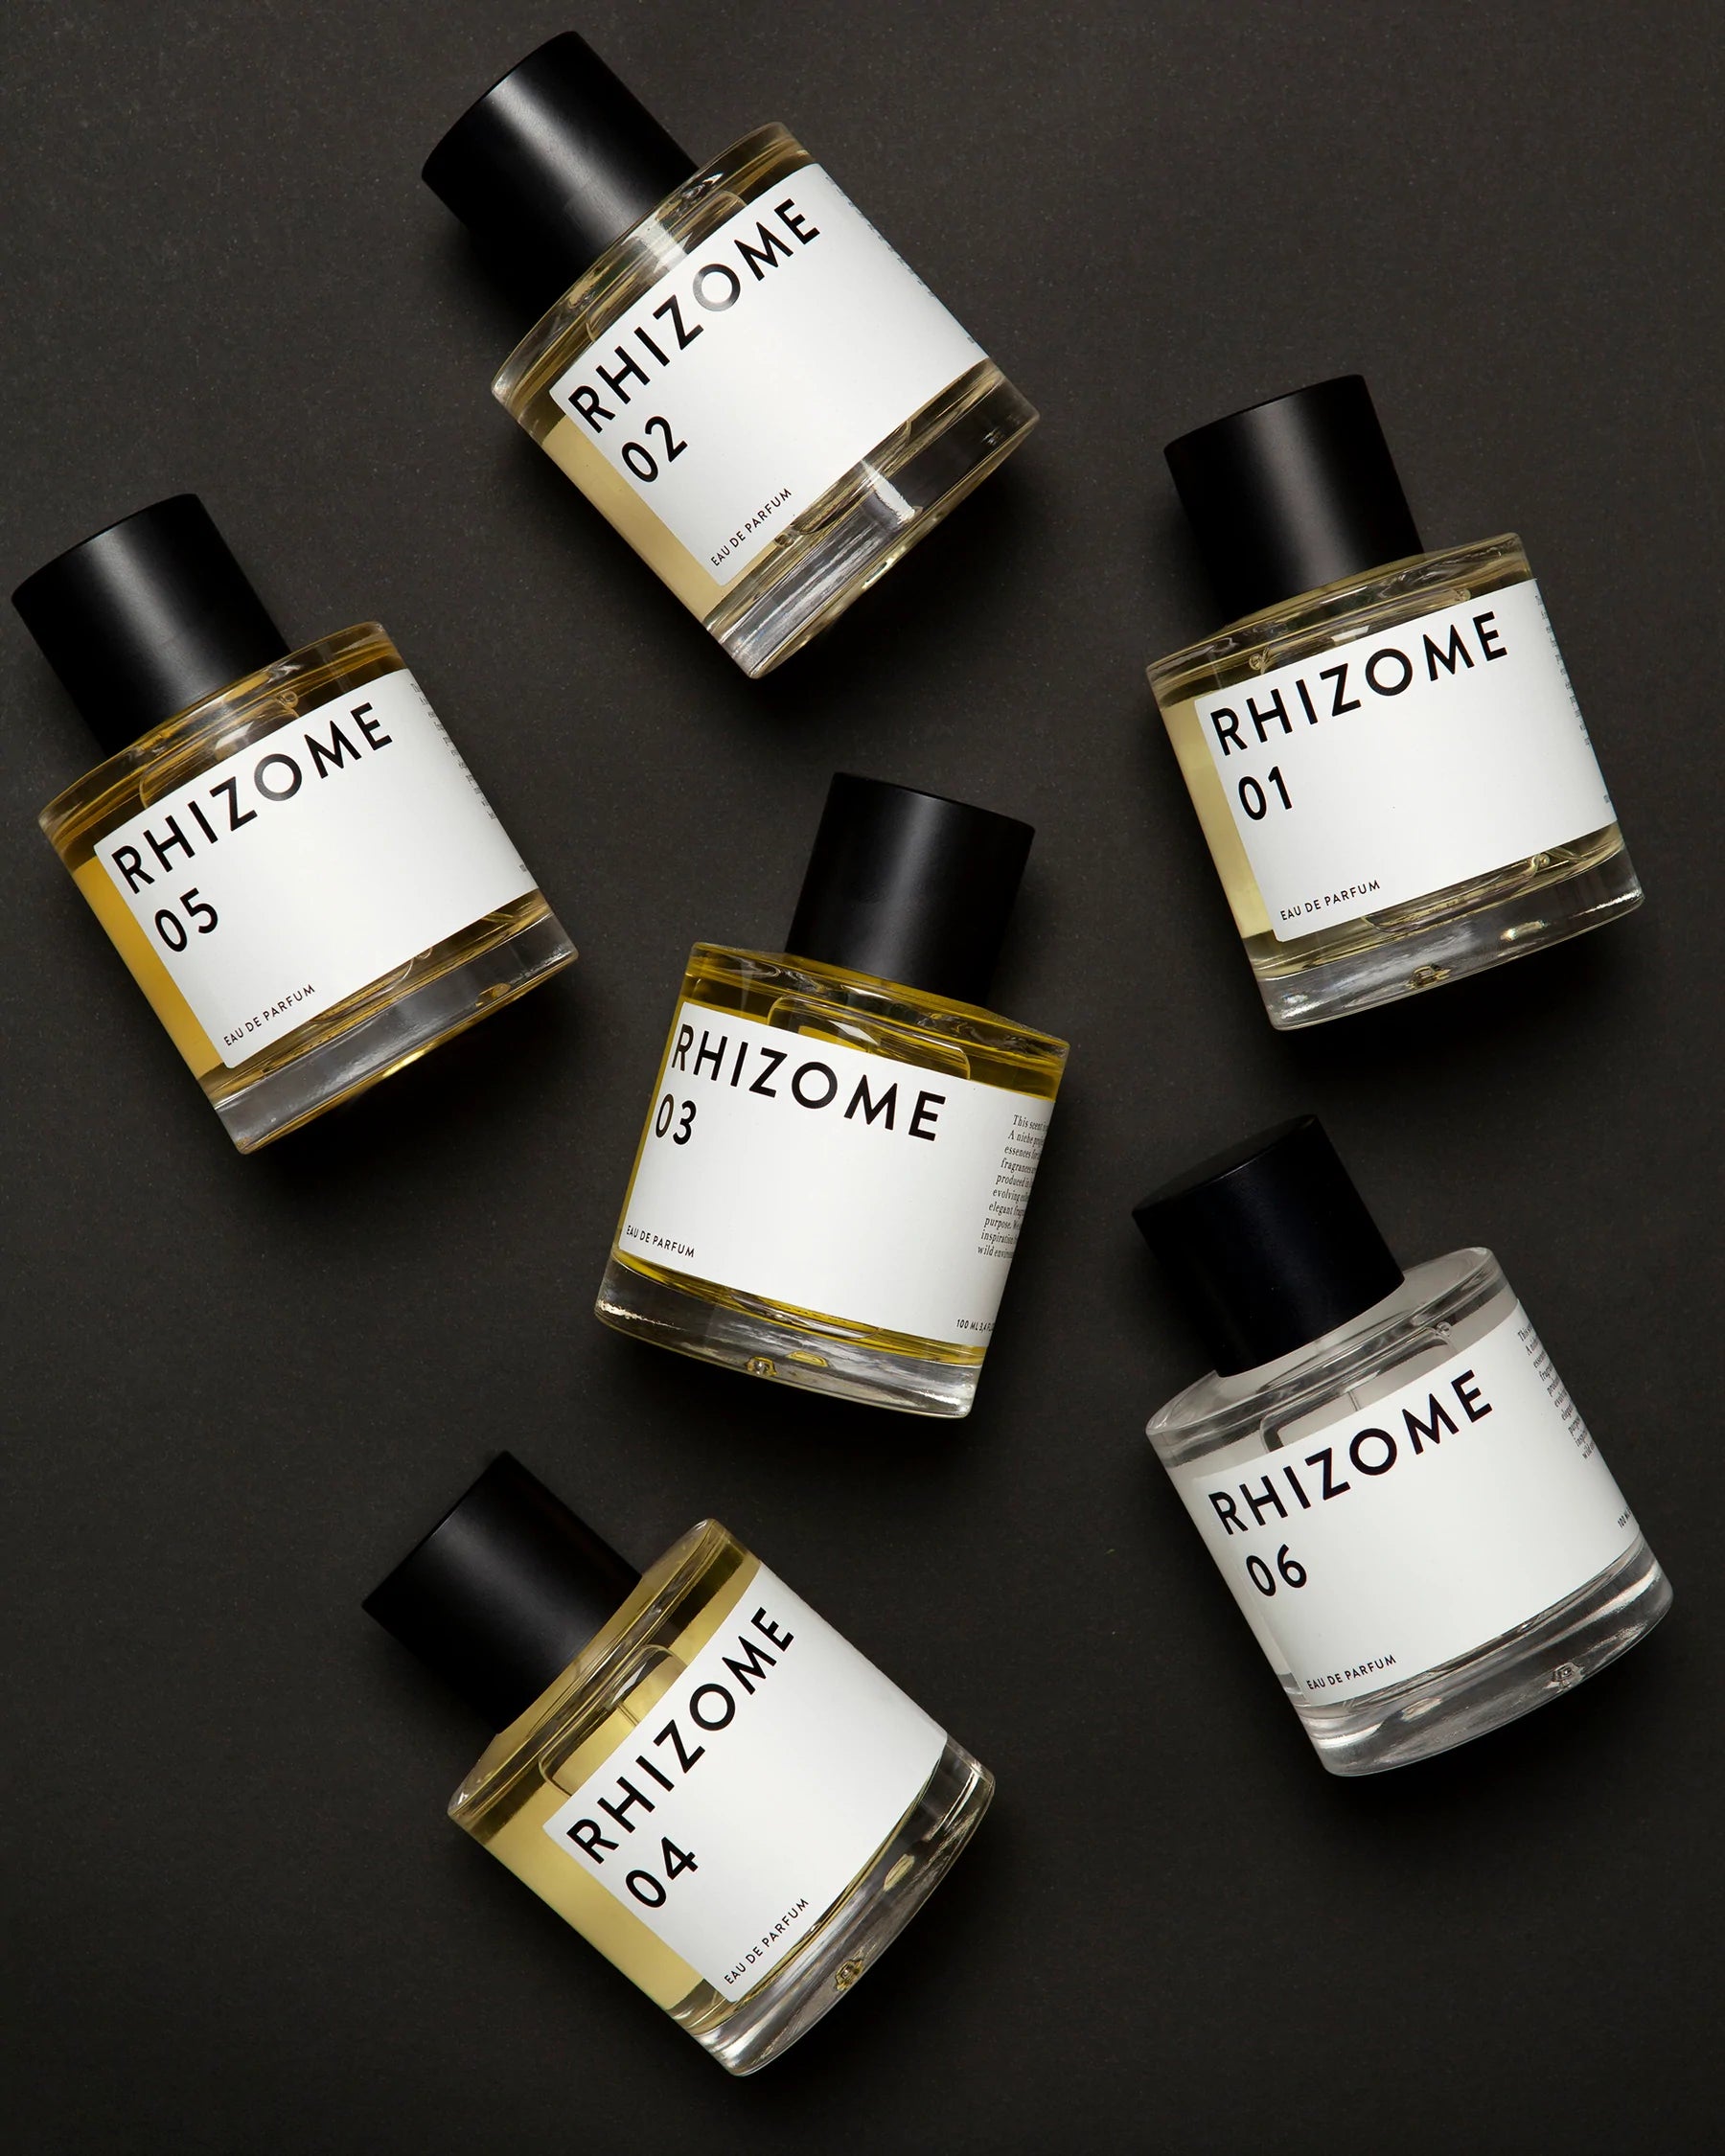 Find here the whole range of rhizome scents.